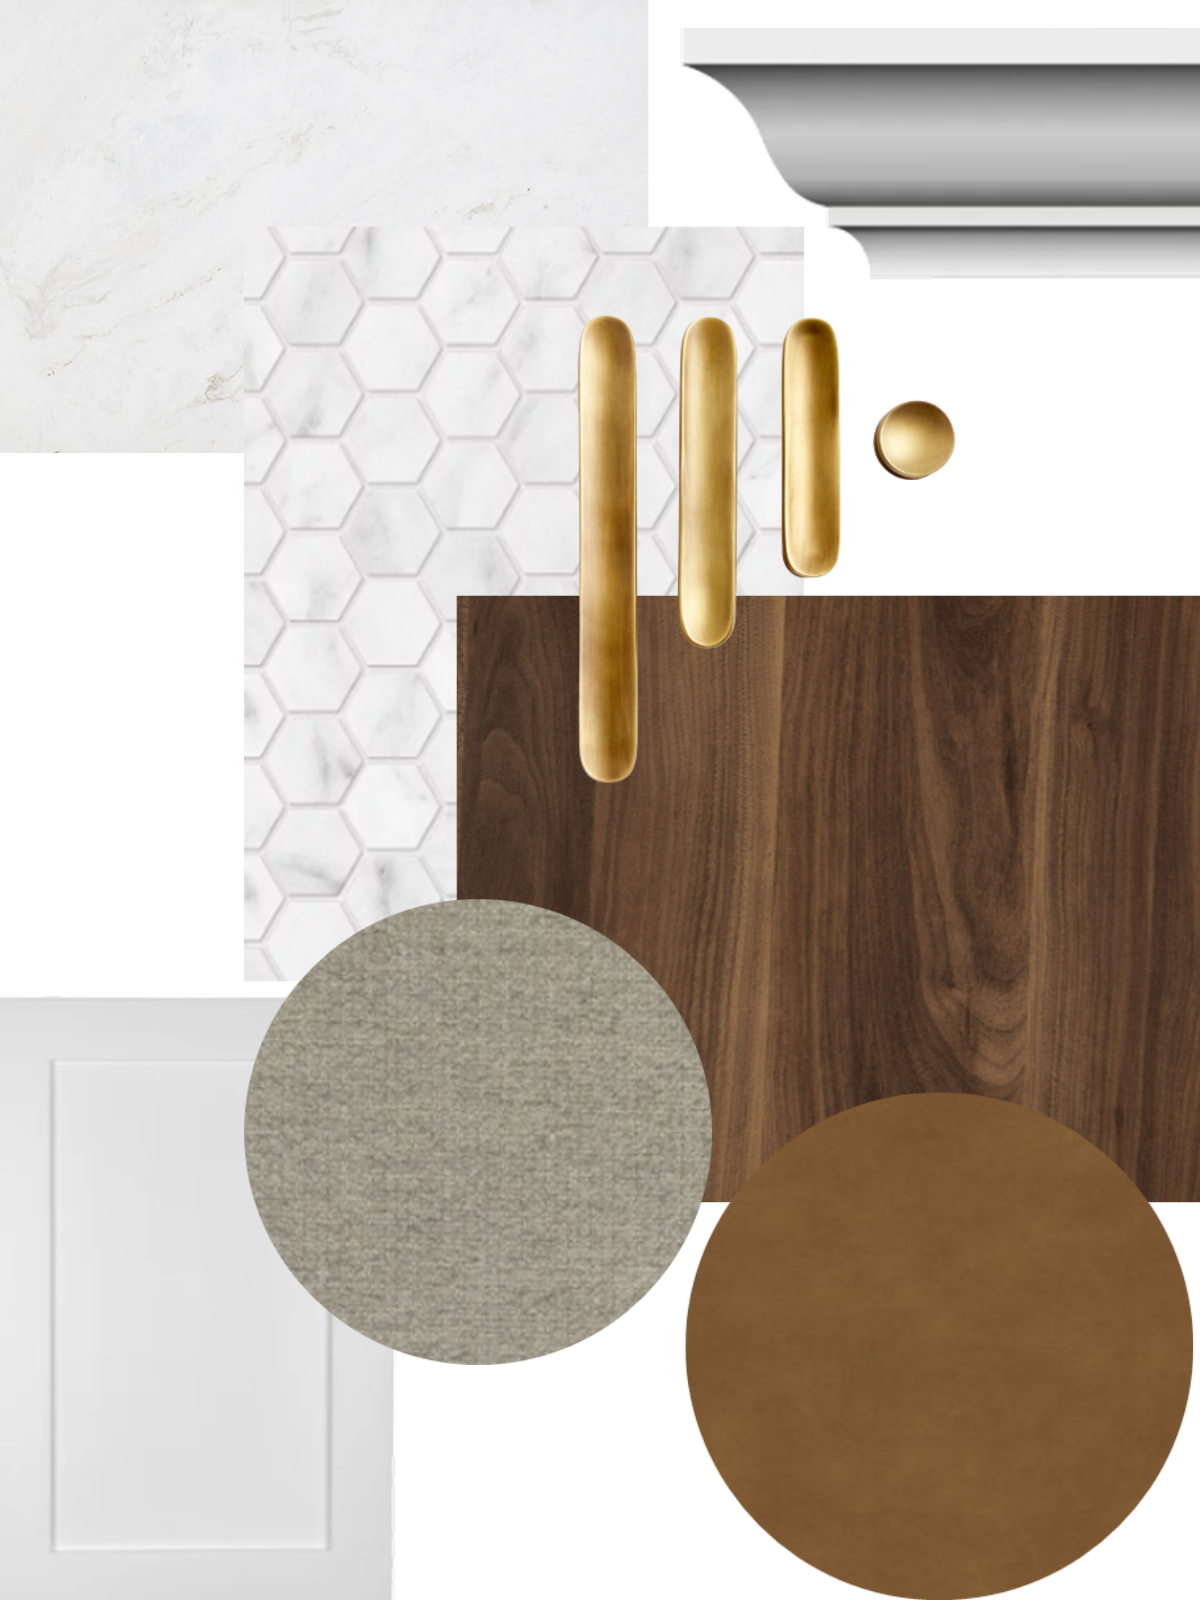 sample mood board showing sample finishes, hardware, cabinet door and tiles